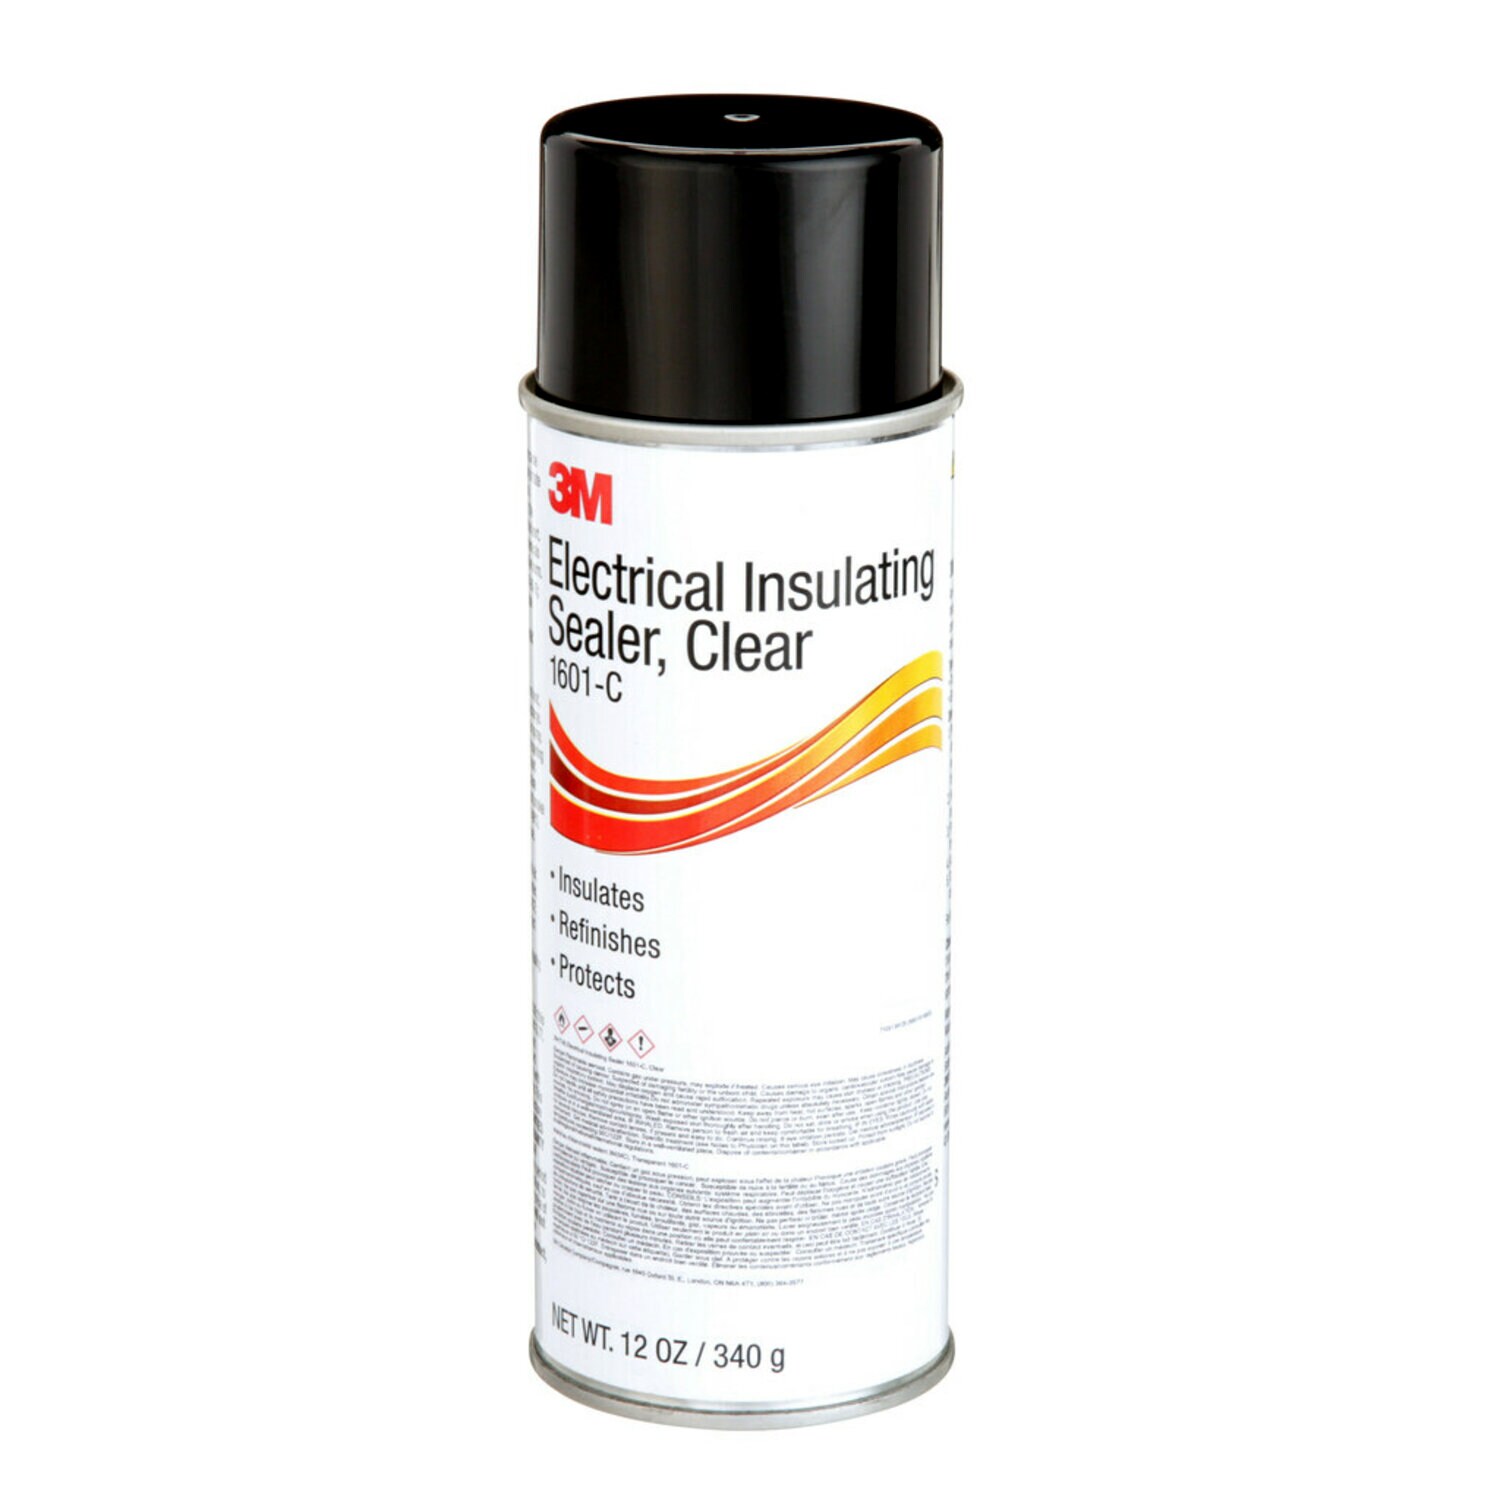 7100139129 - 3M Electrical Insulating Sealer 1601-C, 12-oz Can, Clear, 12
Canisters/Case